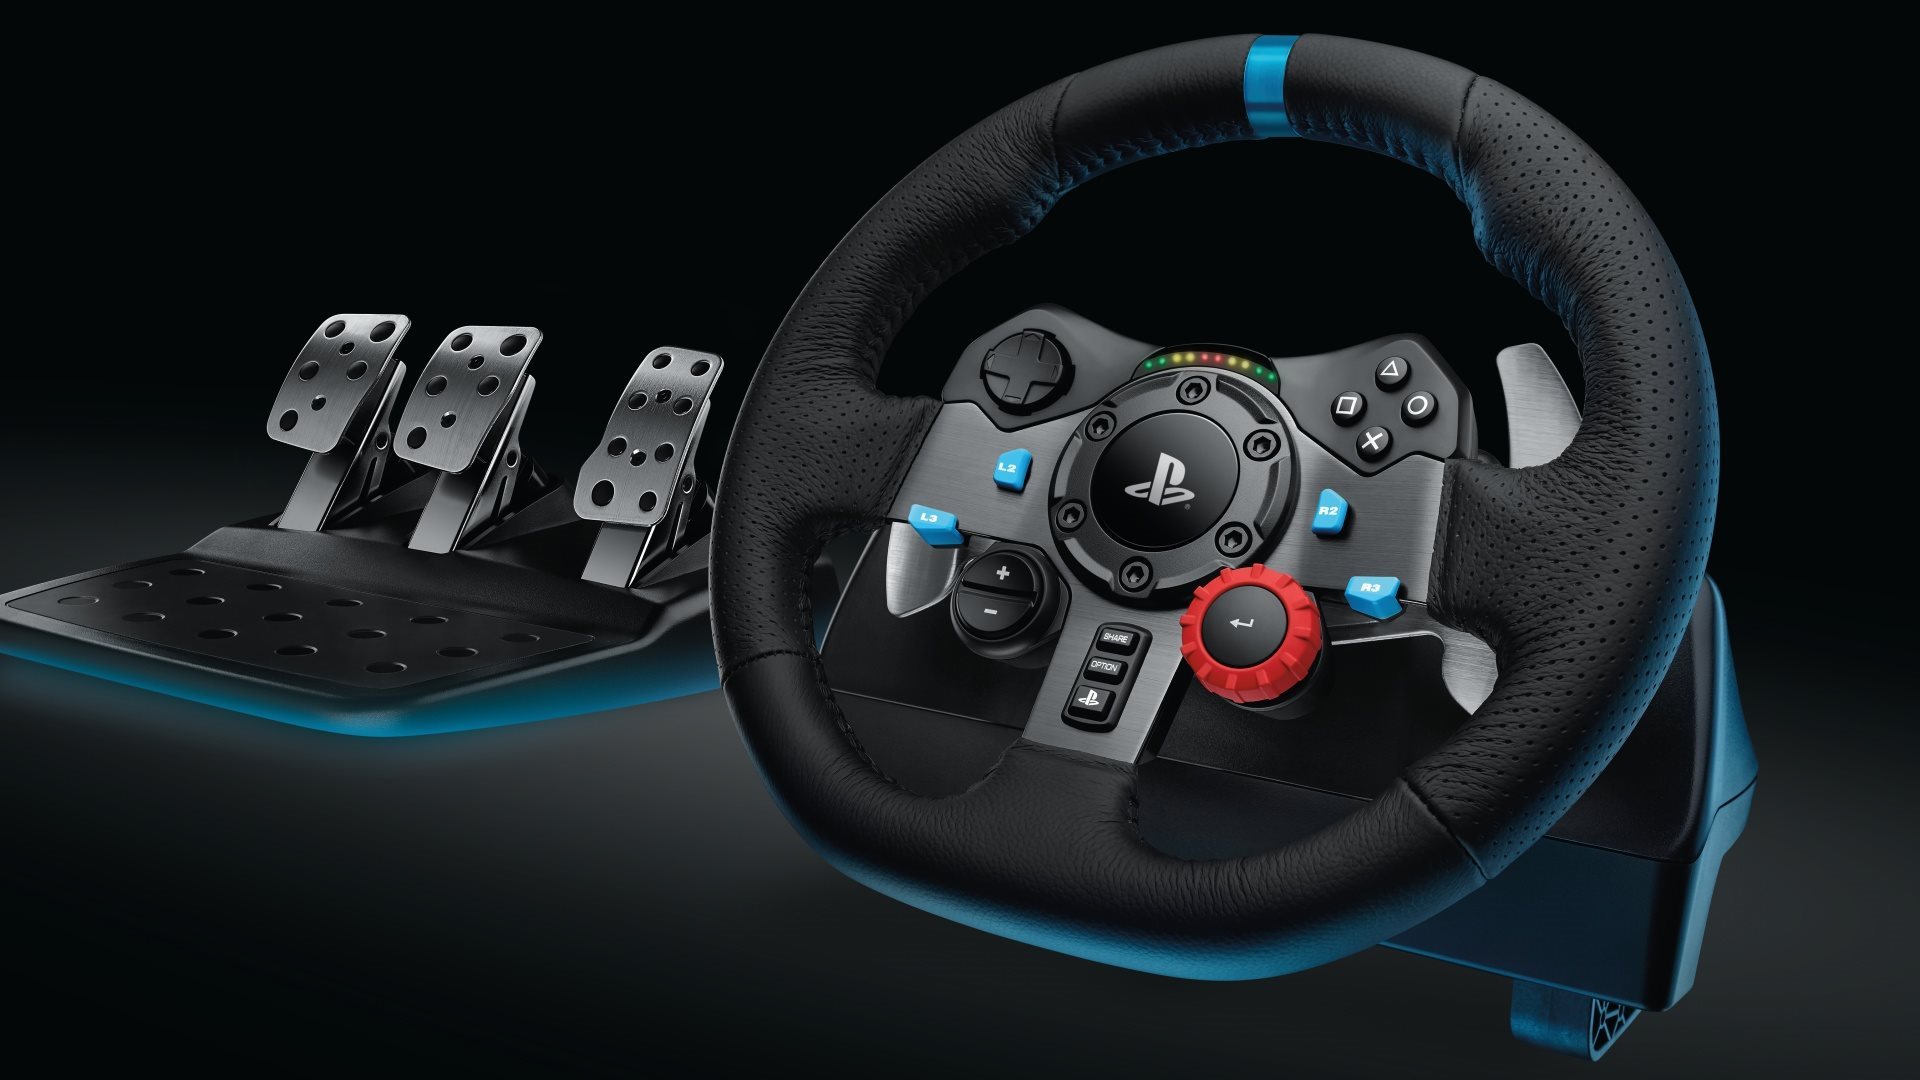 Download Wallpapers Logitech G29 Steering Game Racing Wheel Wheel Pedal Games For Desktop With Resolution 19x1080 High Quality Hd Pictures Wallpapers